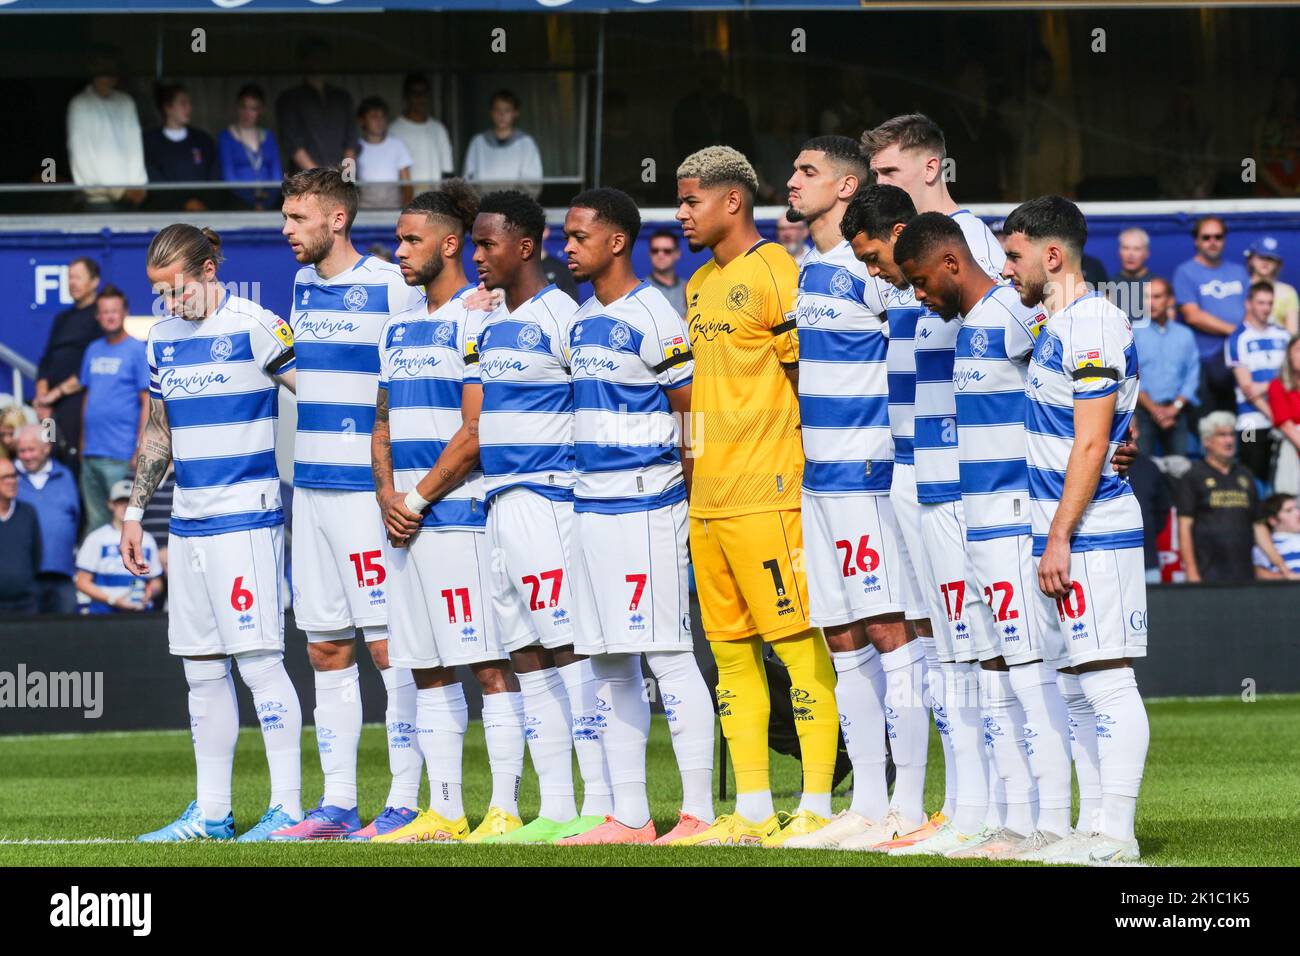 London, UK. 17th Sep, 2022. QPR players pay respects to the late Queen Elizabeth before the Sky Bet Championship match between Queens Park Rangers and Stoke City at the Loftus Road Stadium, London on Saturday 17th September 2022. (Credit: Ian Randall | MI News) Credit: MI News & Sport /Alamy Live News Stock Photo